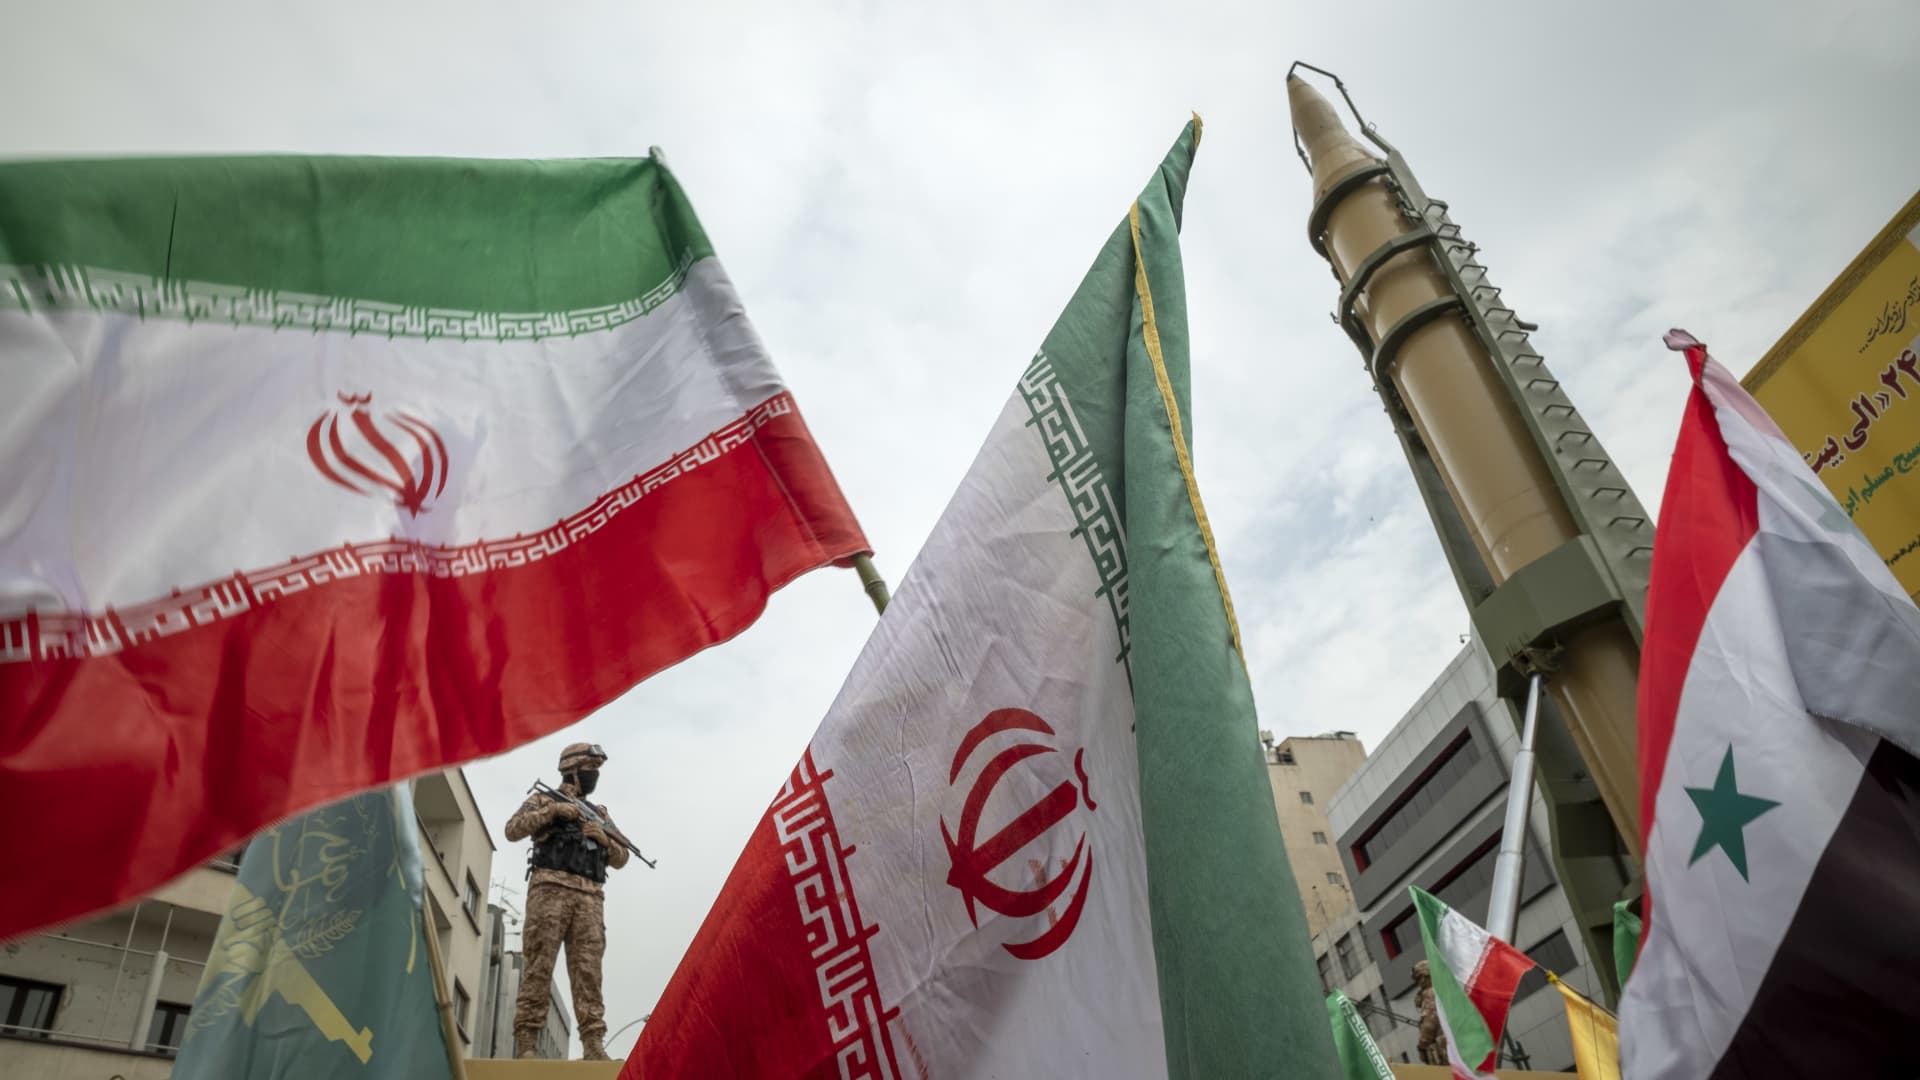 An Islamic Revolutionary Guard Corps (IRGC) military personnel stands guard next to two Iranian Kheibar Shekan Ballistic missiles in downtown Tehran as demonstrators wave Irans and Syrian flags during a rally commemorating the International Quds Day, also known as the Jerusalem day, on April 29, 2022.